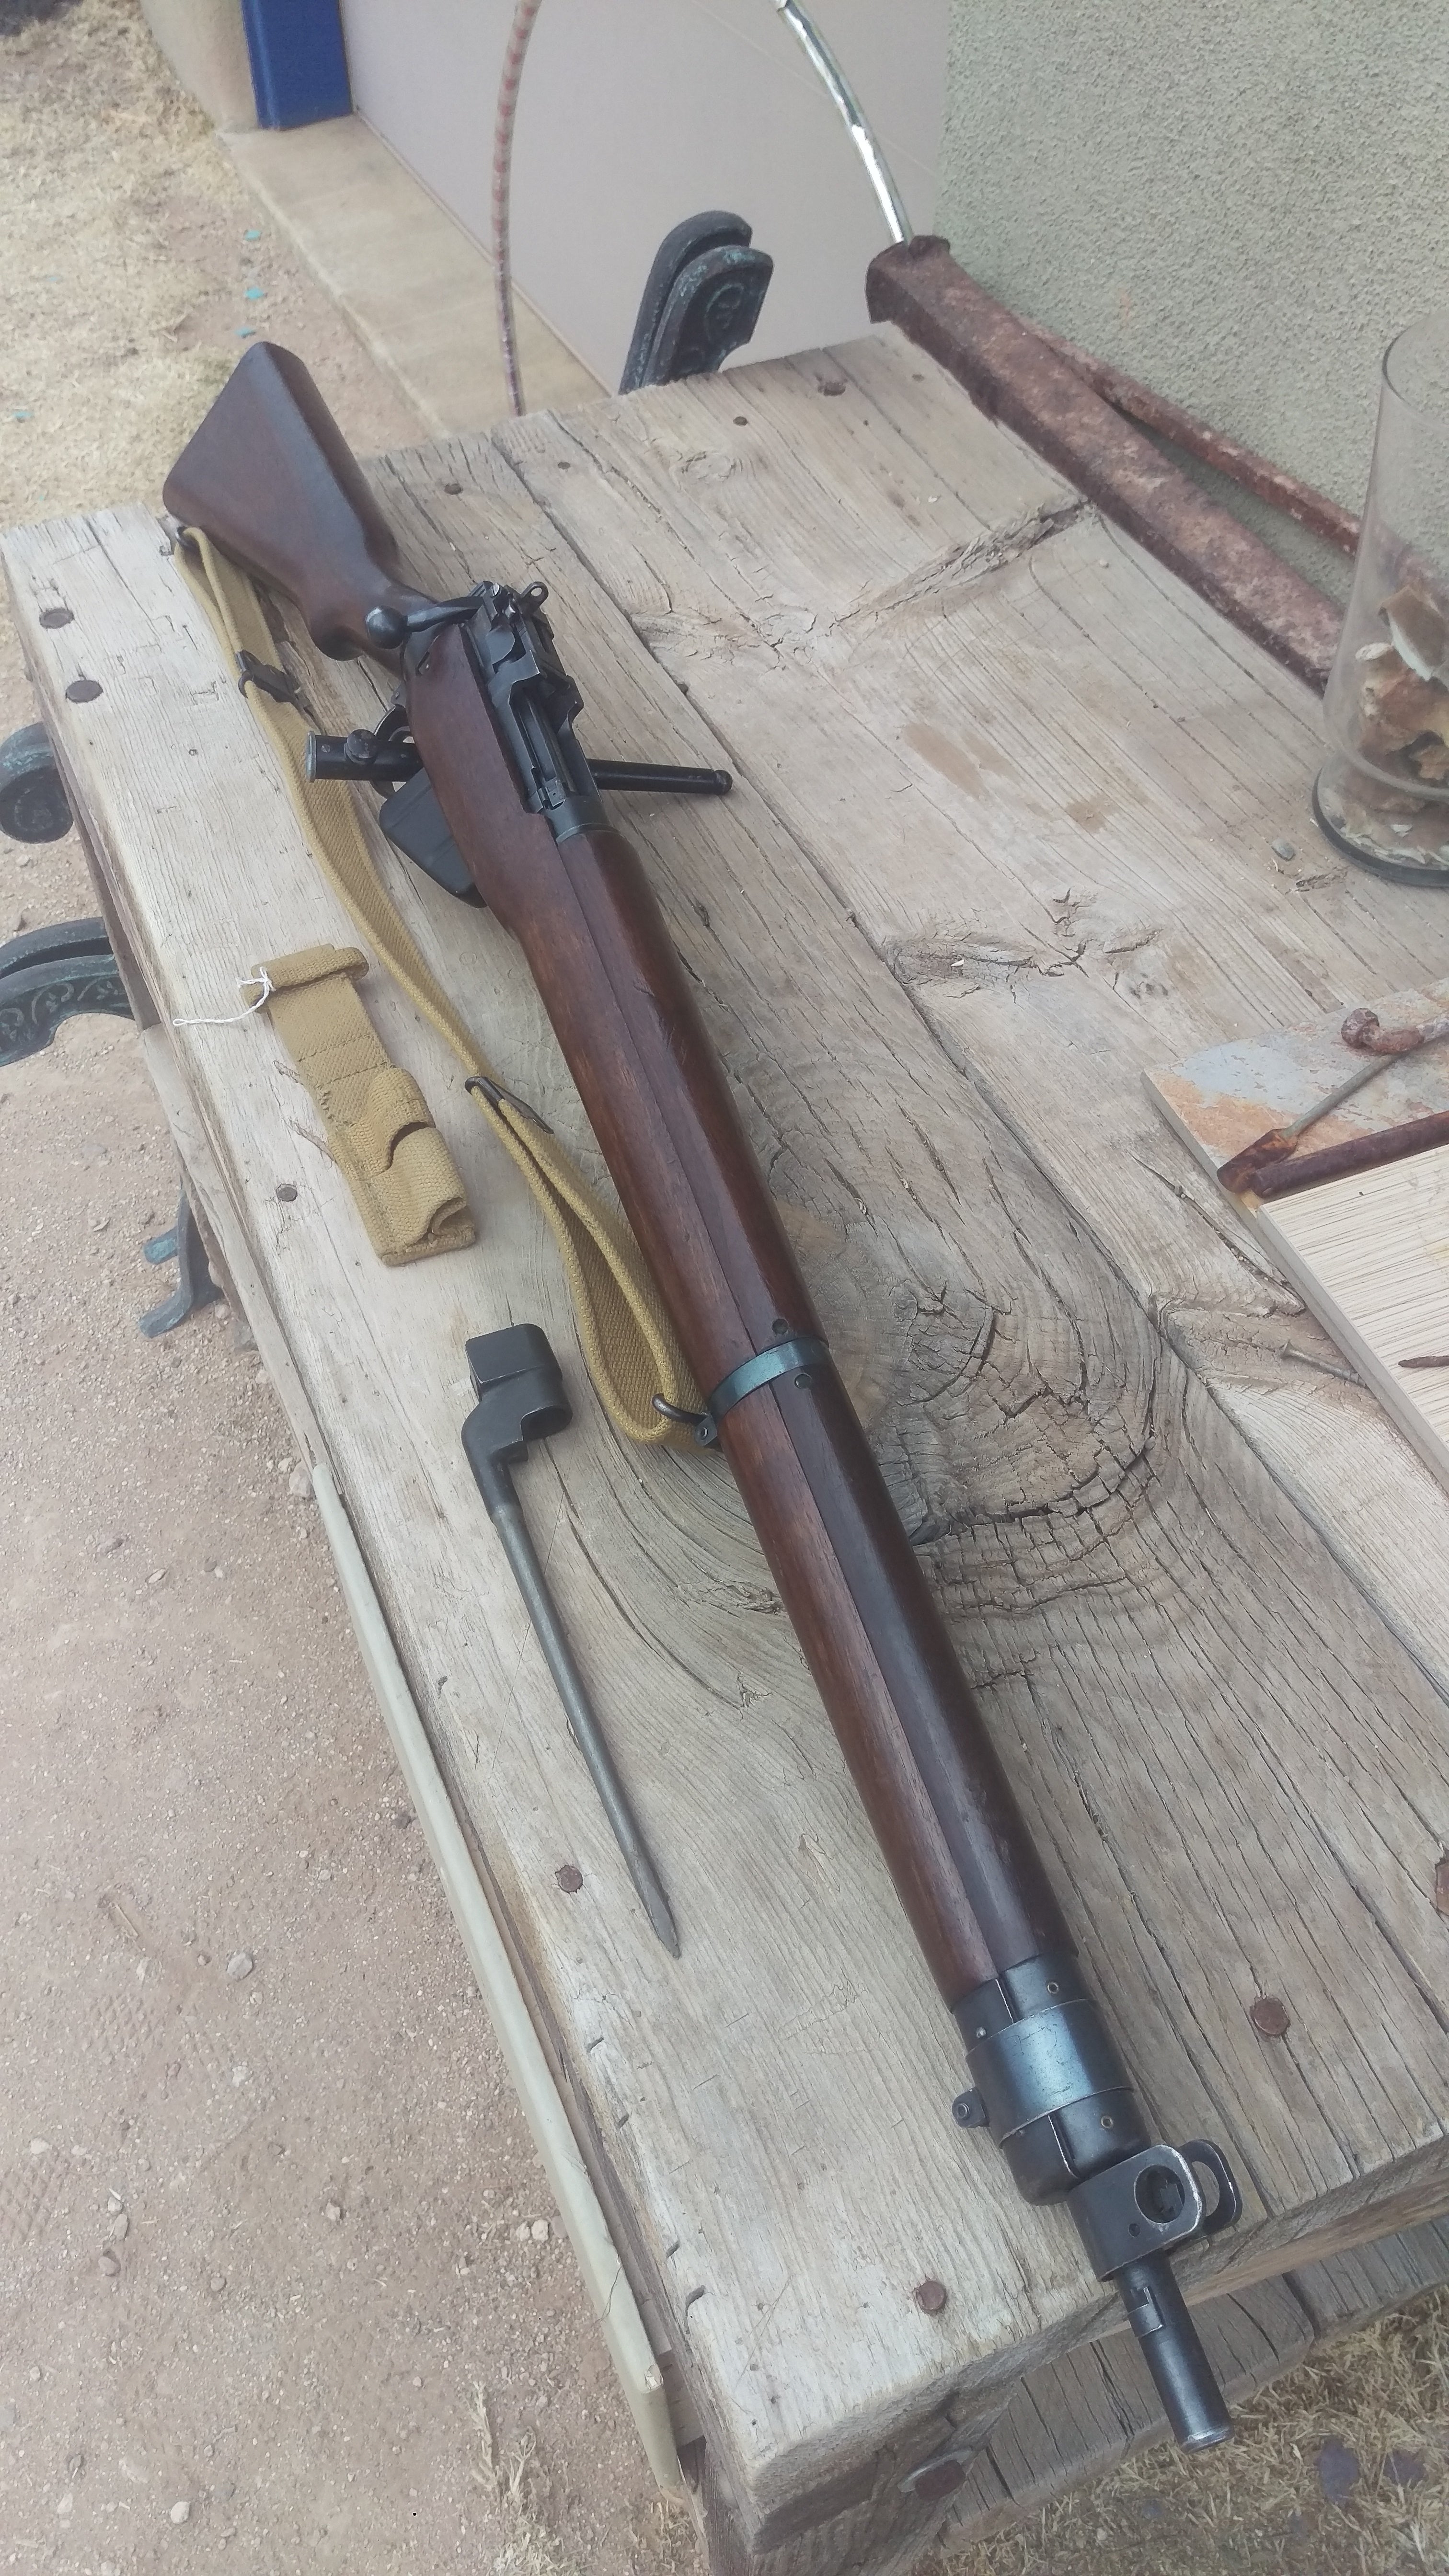 Sold at Auction: Long Branch Enfield No. 4 Mk 1/3